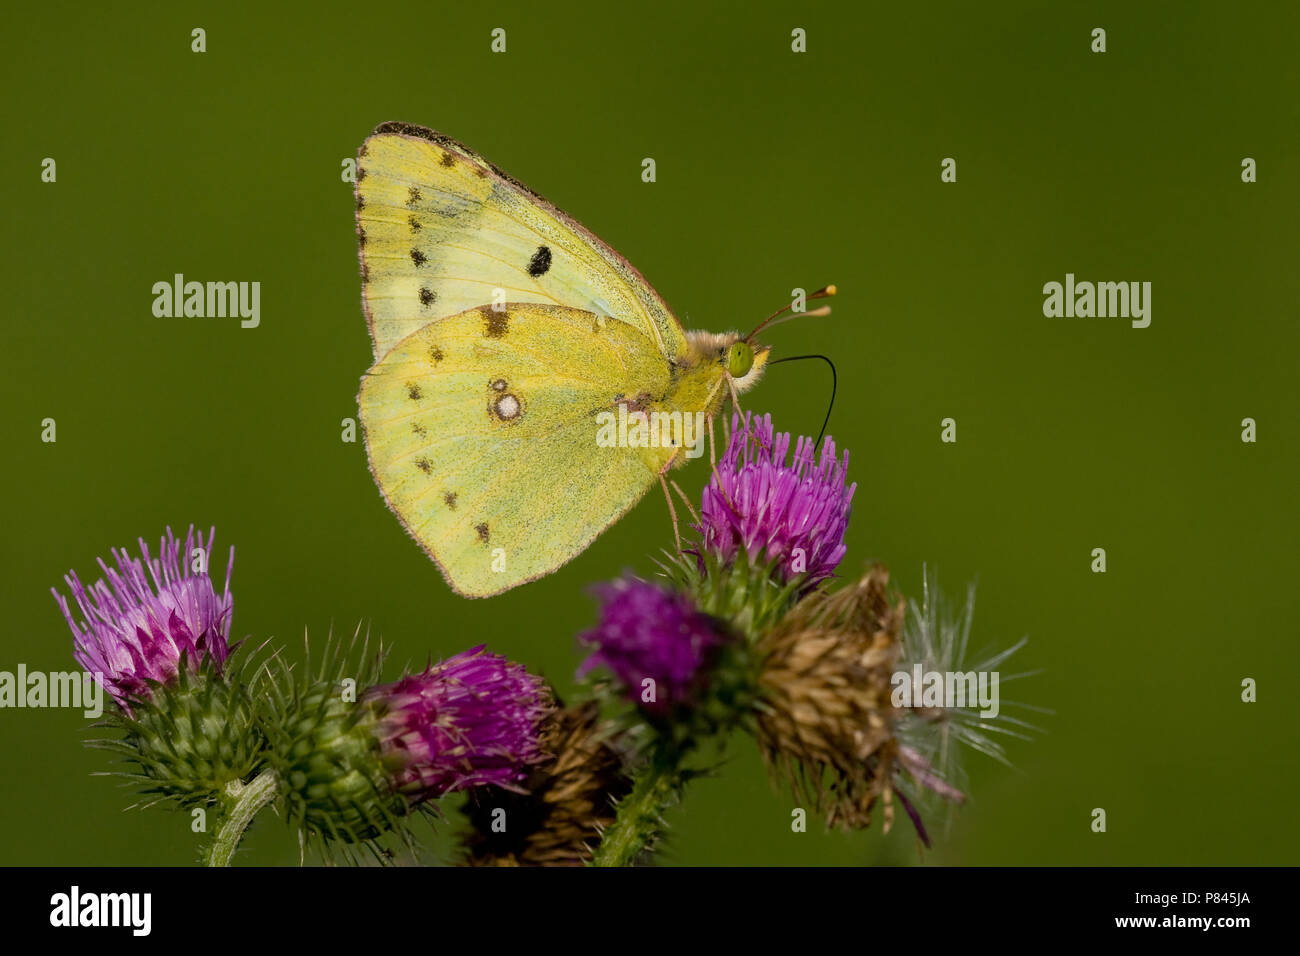 Gele Luzernevlinder op een distel; Pale Clouded Yellow on a thistle Stock Photo